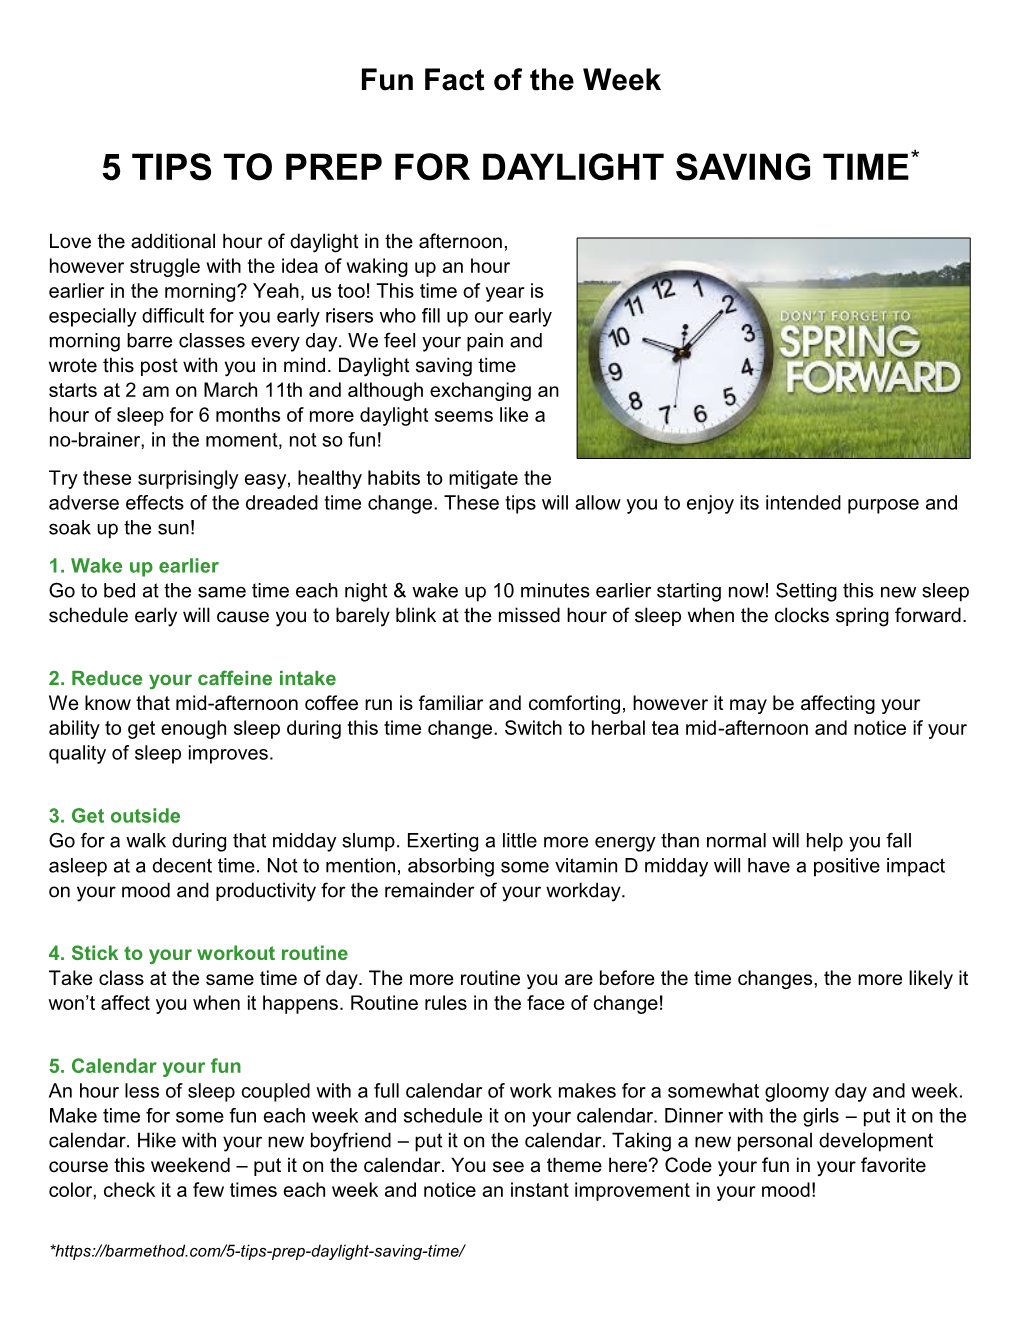 5 Tips to Prep for Daylight Saving Time*